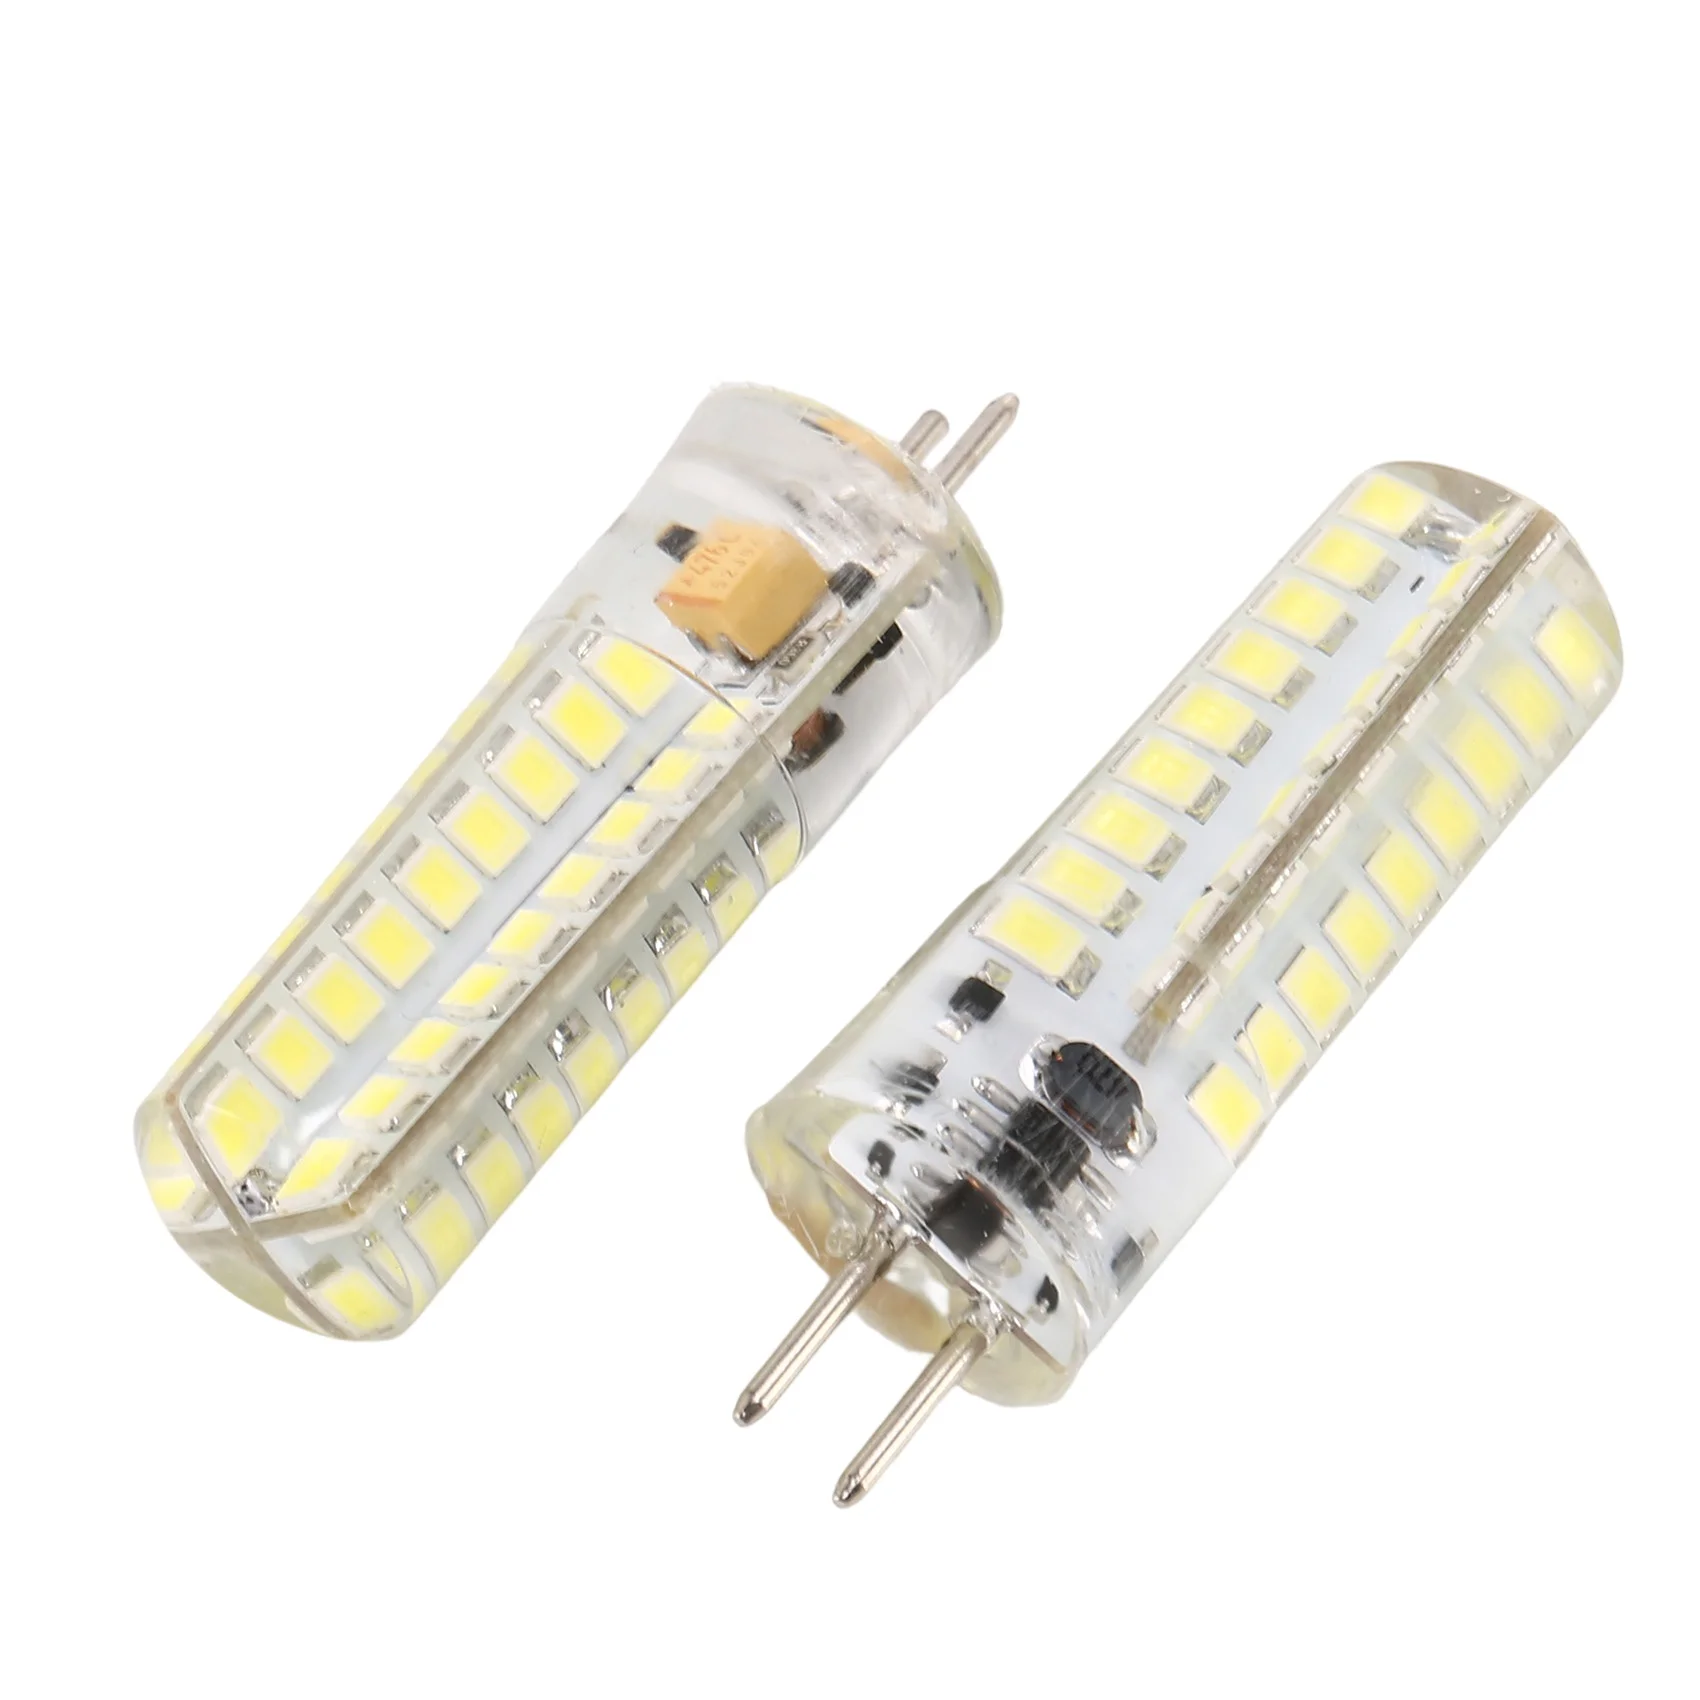 

2x 6.5W GY6.35 LED Bulbs 72 2835 SMD LED 320lm 50W Halogen Equivalent Dimmable Pure White 6000K Beam Angle Silicone Corn Bulb